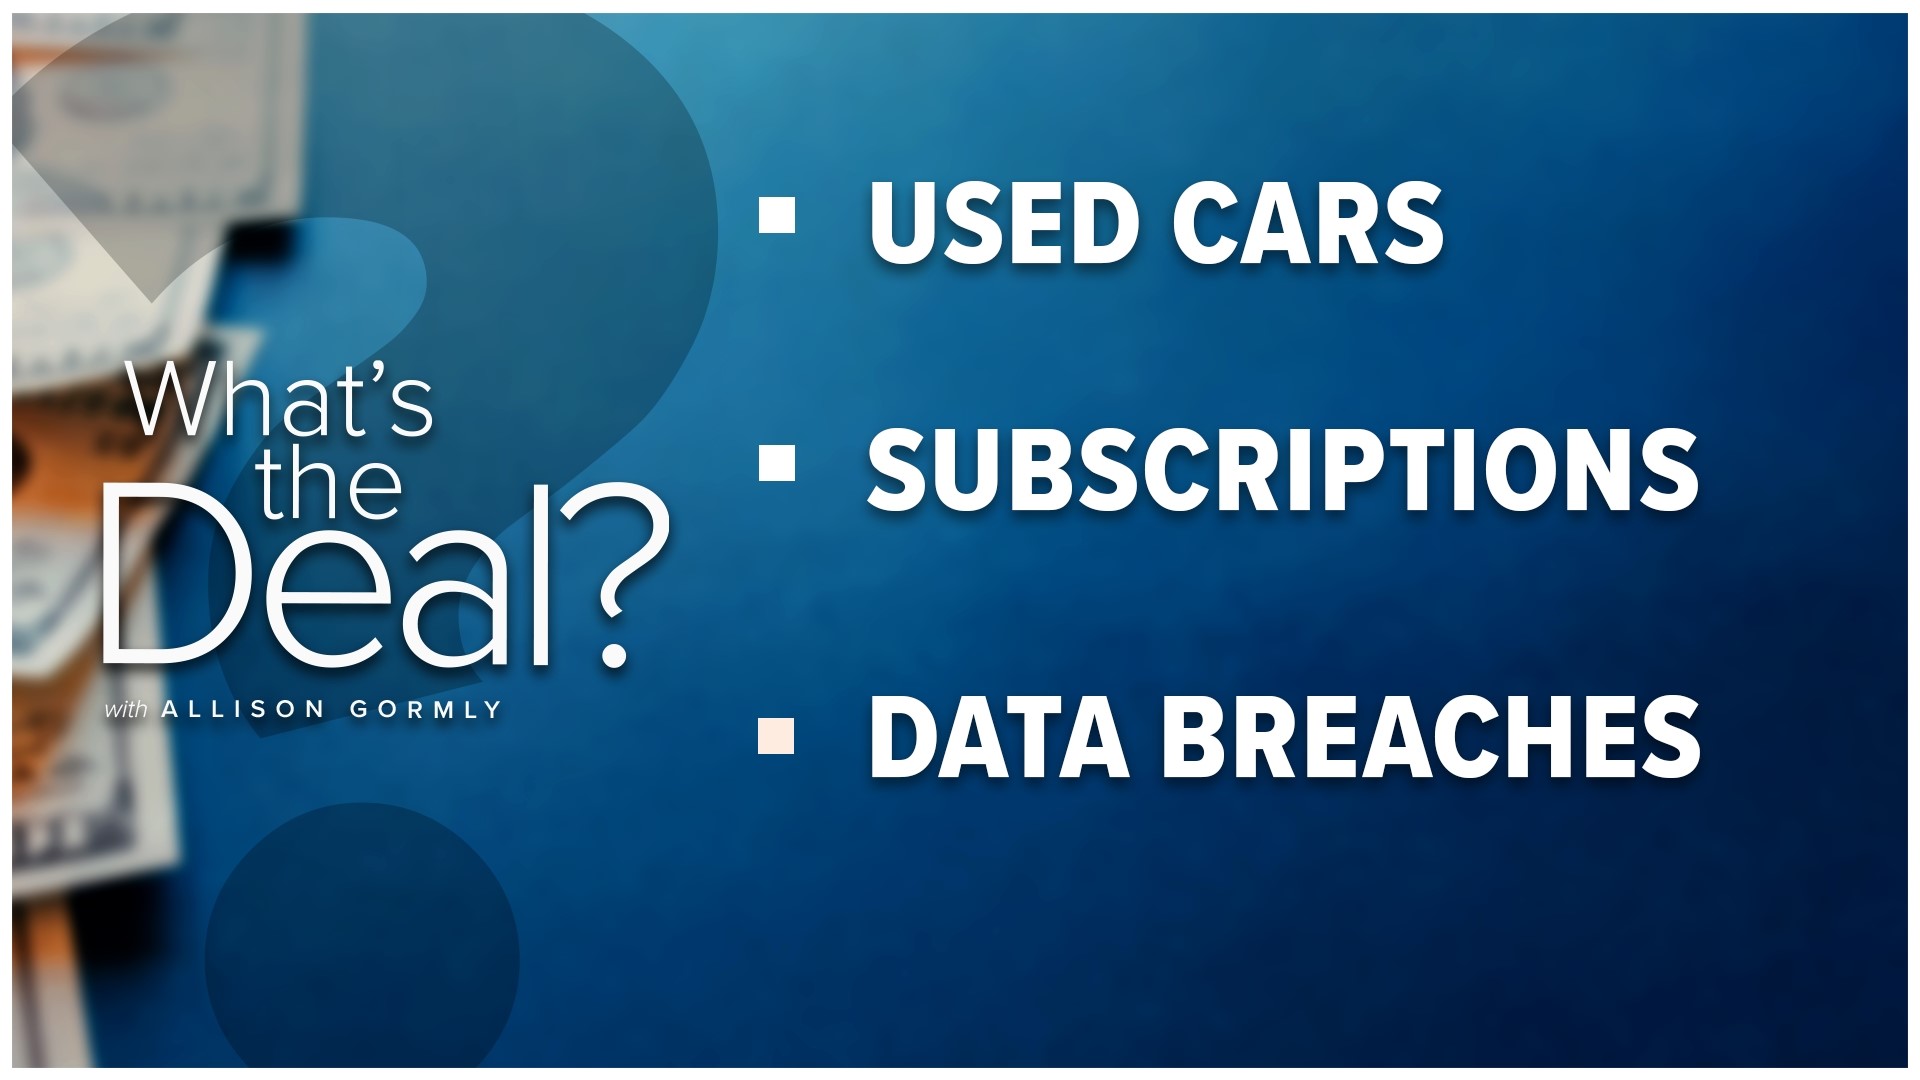 We look into what you need to know about buying a used car, how to organize all those streaming subscriptions and what to do if you're a victim of a data breach.